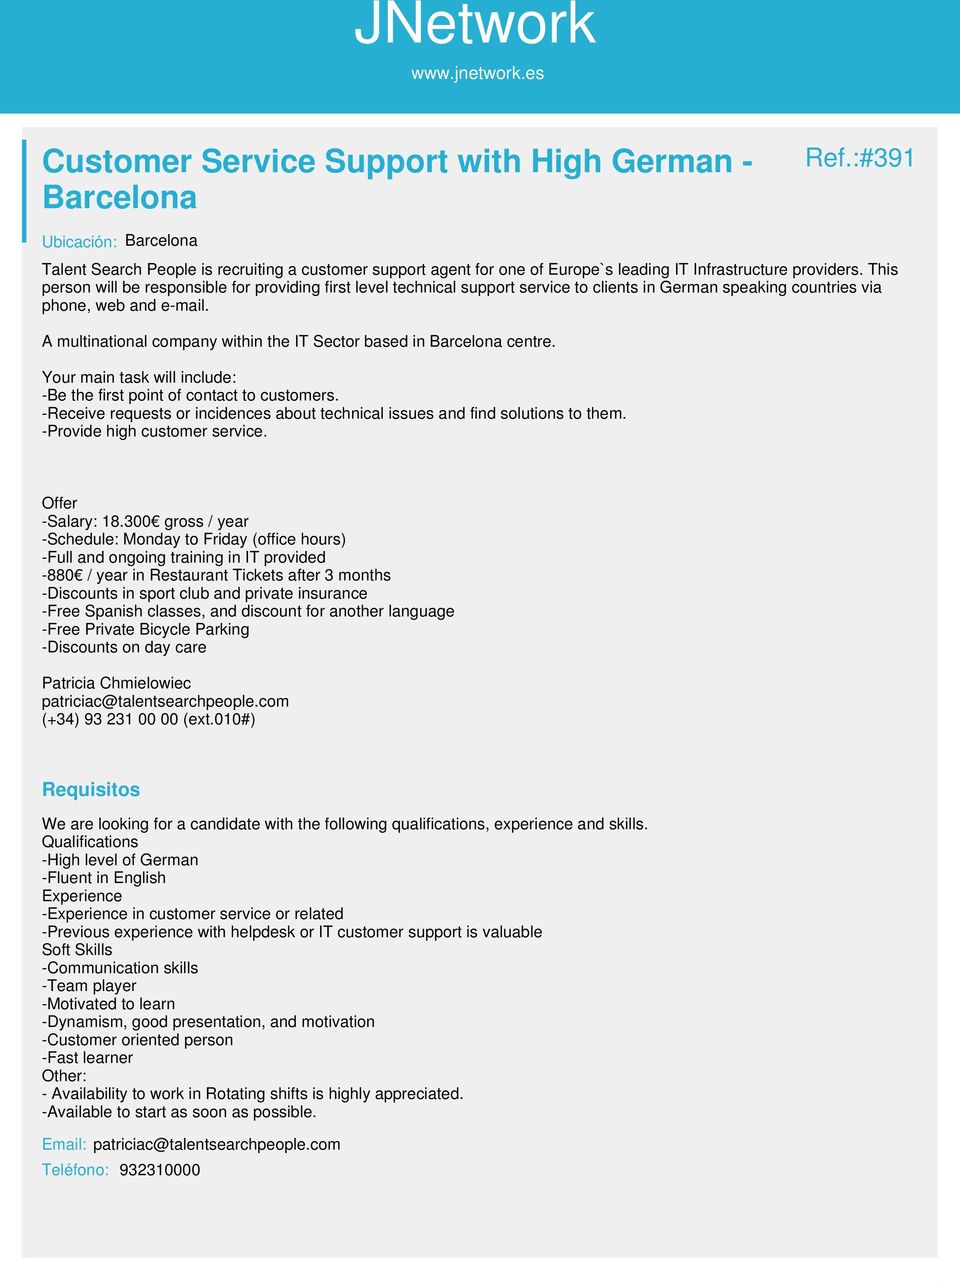 A multinational company within the IT Sector based in Barcelona centre. Your main task will include: -Be the first point of contact to customers.